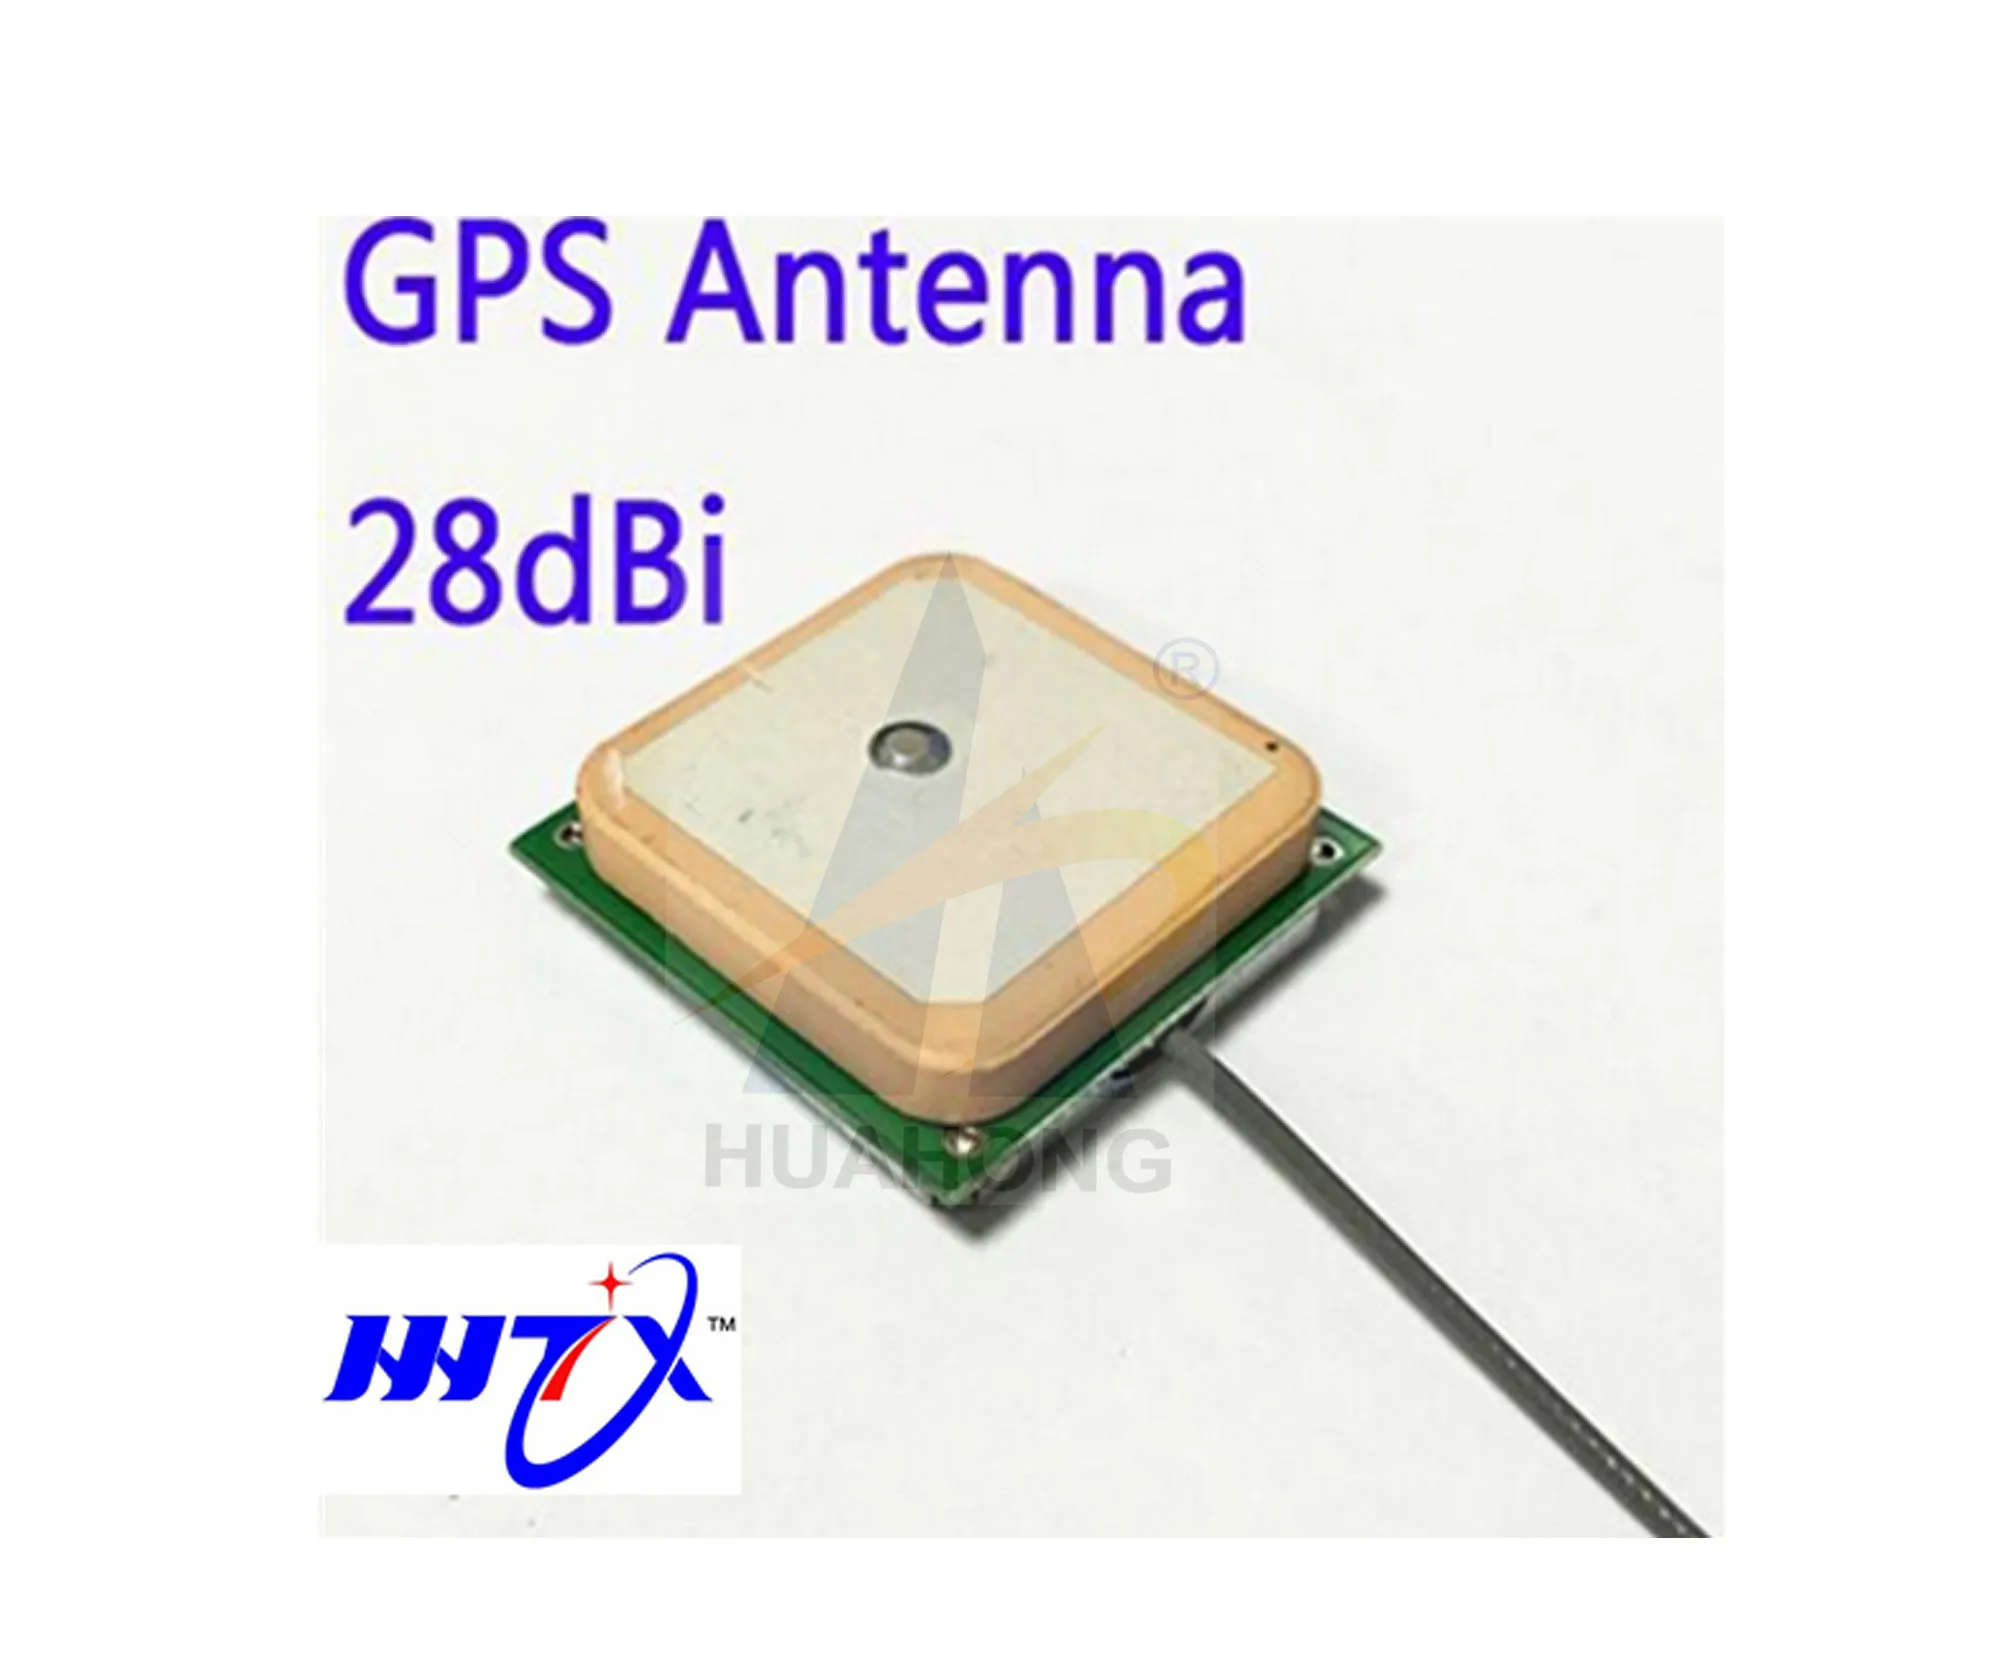 25 25mm Gps Gprs Ceramic Patch Antenna Internal Gps Antenna For Android Tablet Buy Usb Gps Antenna For Android Tablet Internal Gps Antenna 1575 42mhz Gps Antenna Product On Alibaba Com